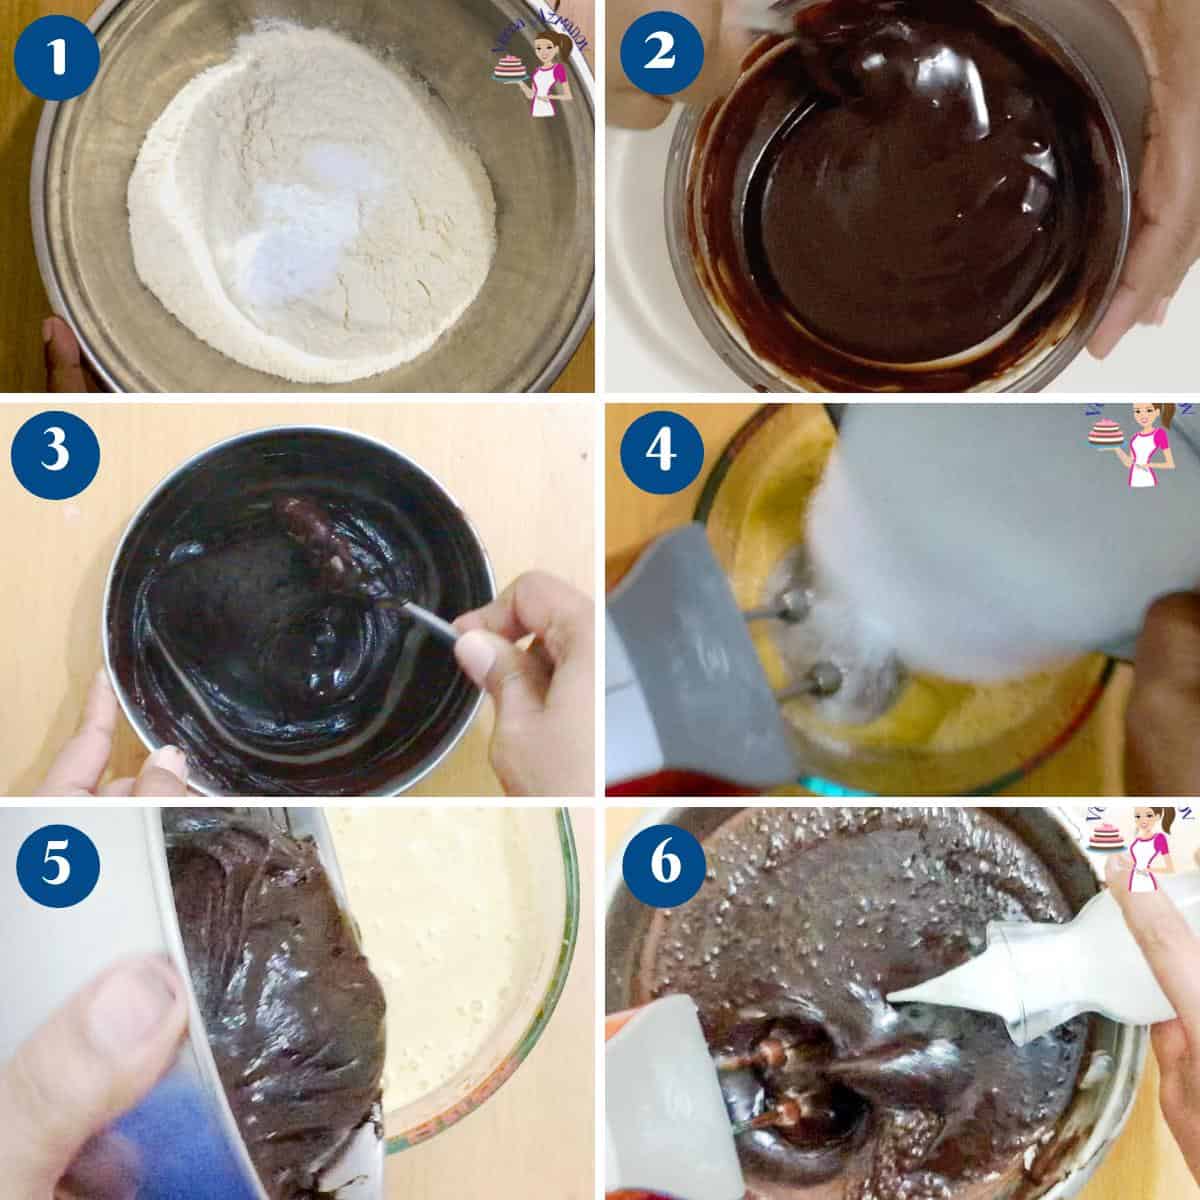 Progress pictures making death by chocolate cake batter.